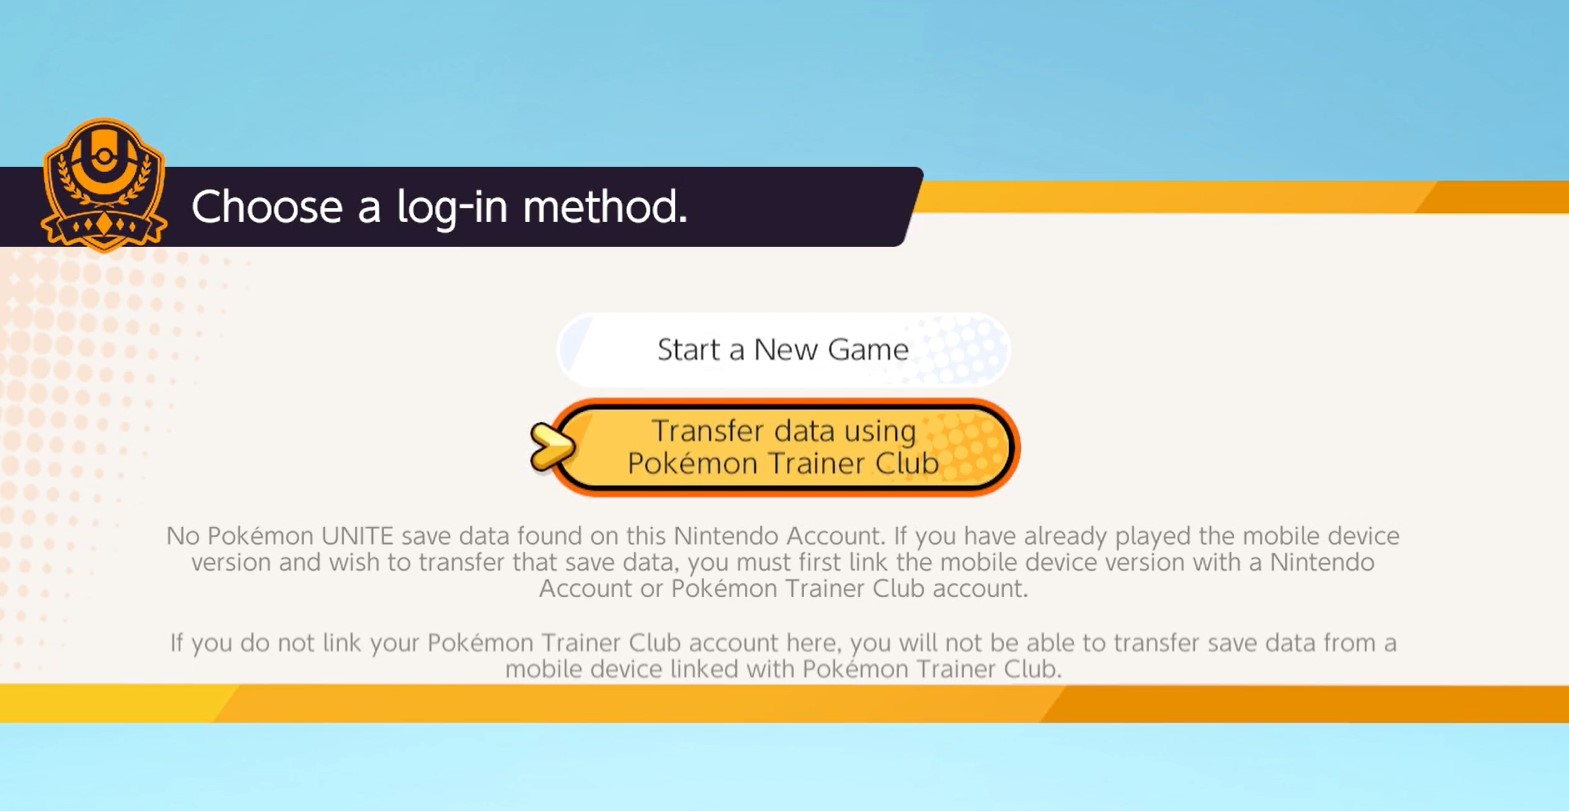 Screenshot shows the Choose a log-in method screen with the following highlighted option selected: Transfer data using Pokémon Trainer Club.